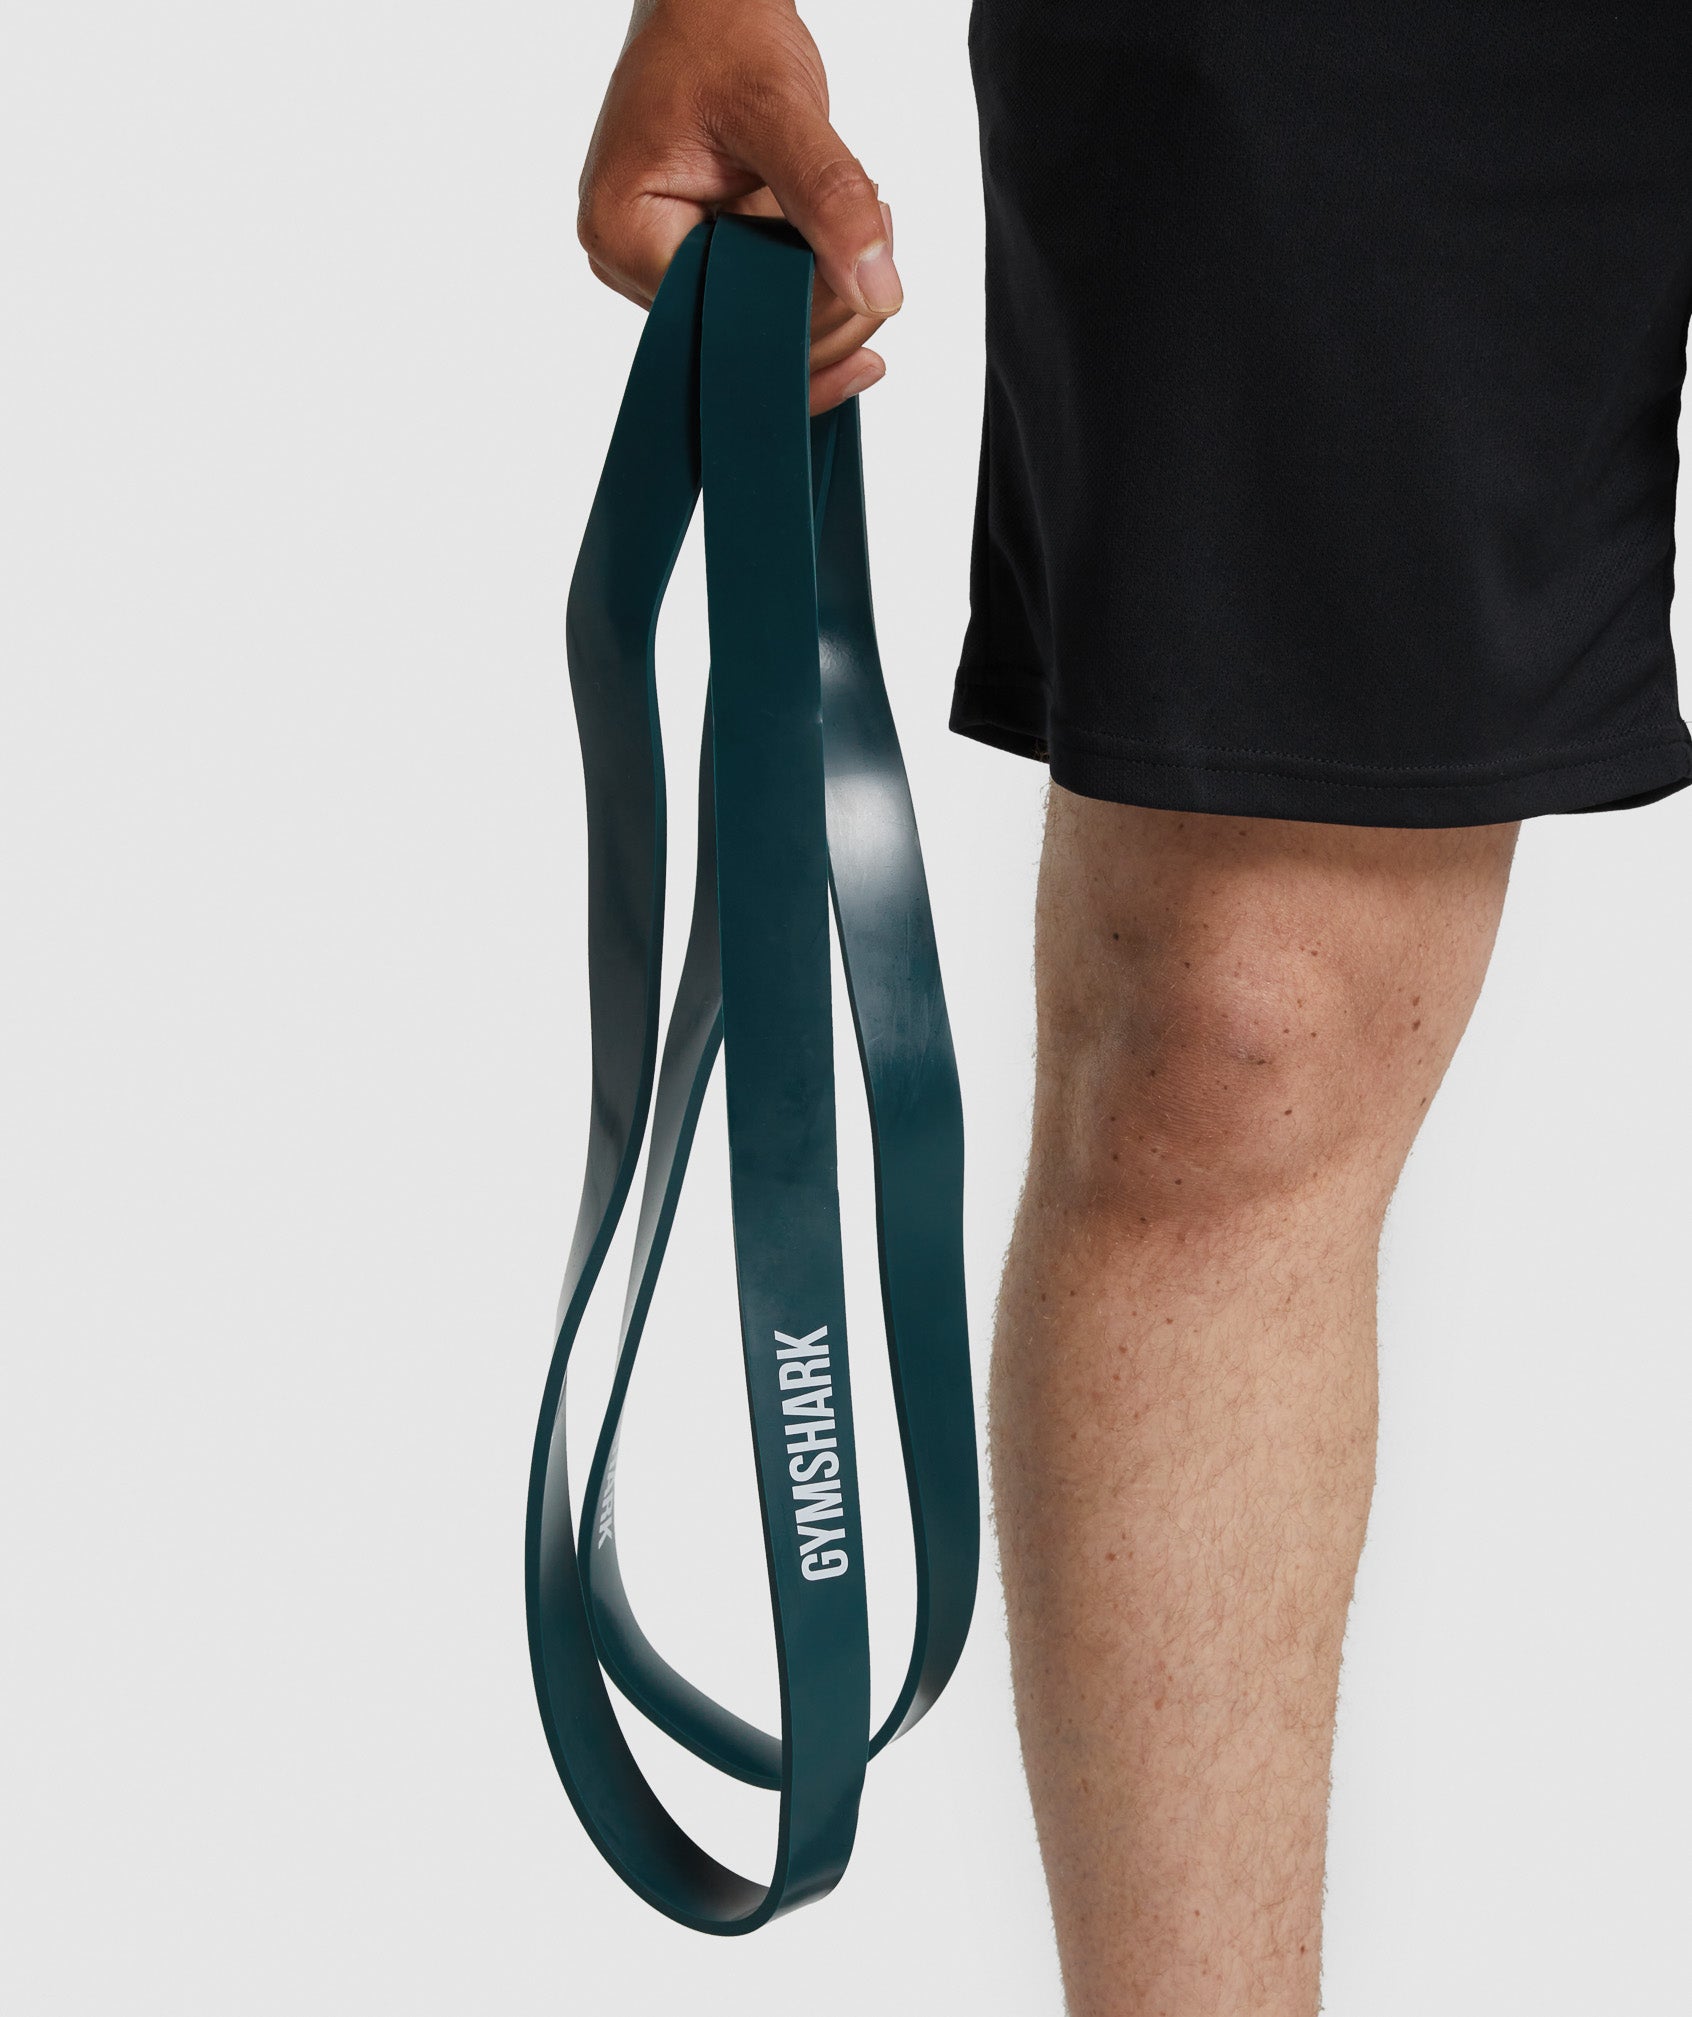 11kg to 36kg Resistance Band in Teal - view 1